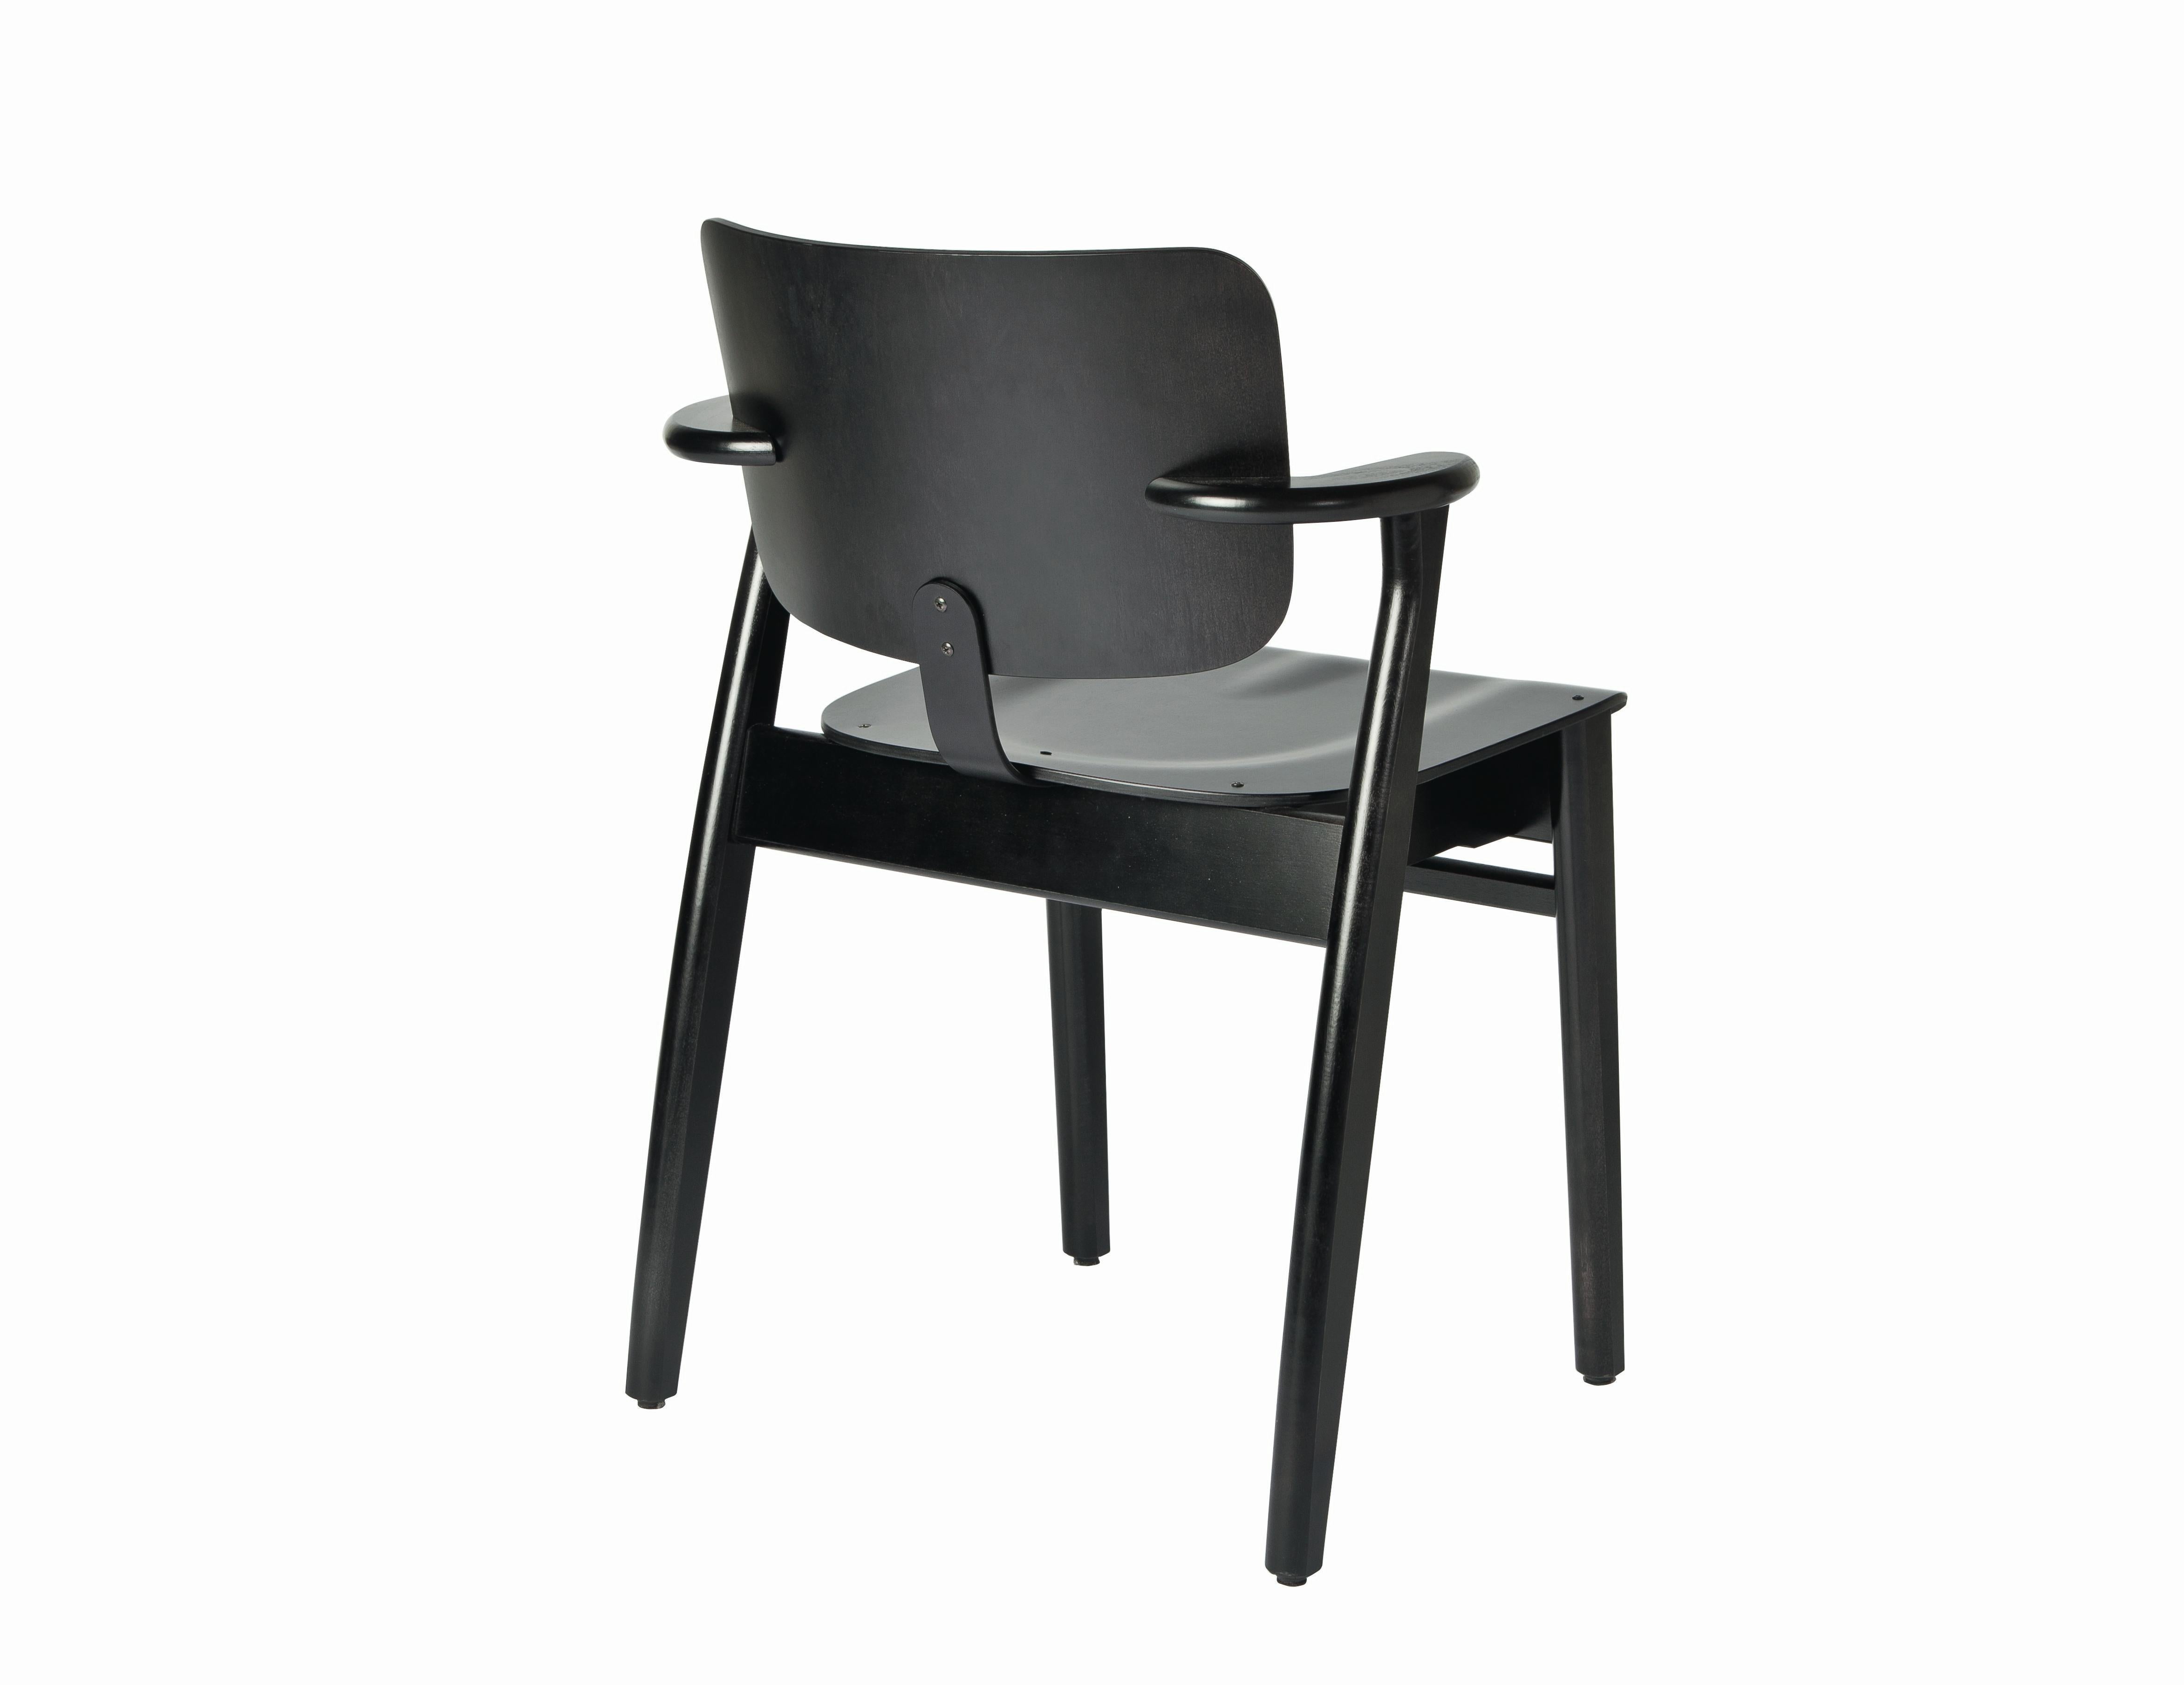 Ilmari Tapiovaara Domus chair in black stained birch for Artek. Designed in 1946 and produced by Artek of Finland. Executed in black stained birch wood. Stackable up to four chairs.

Price is per item. New in box with 